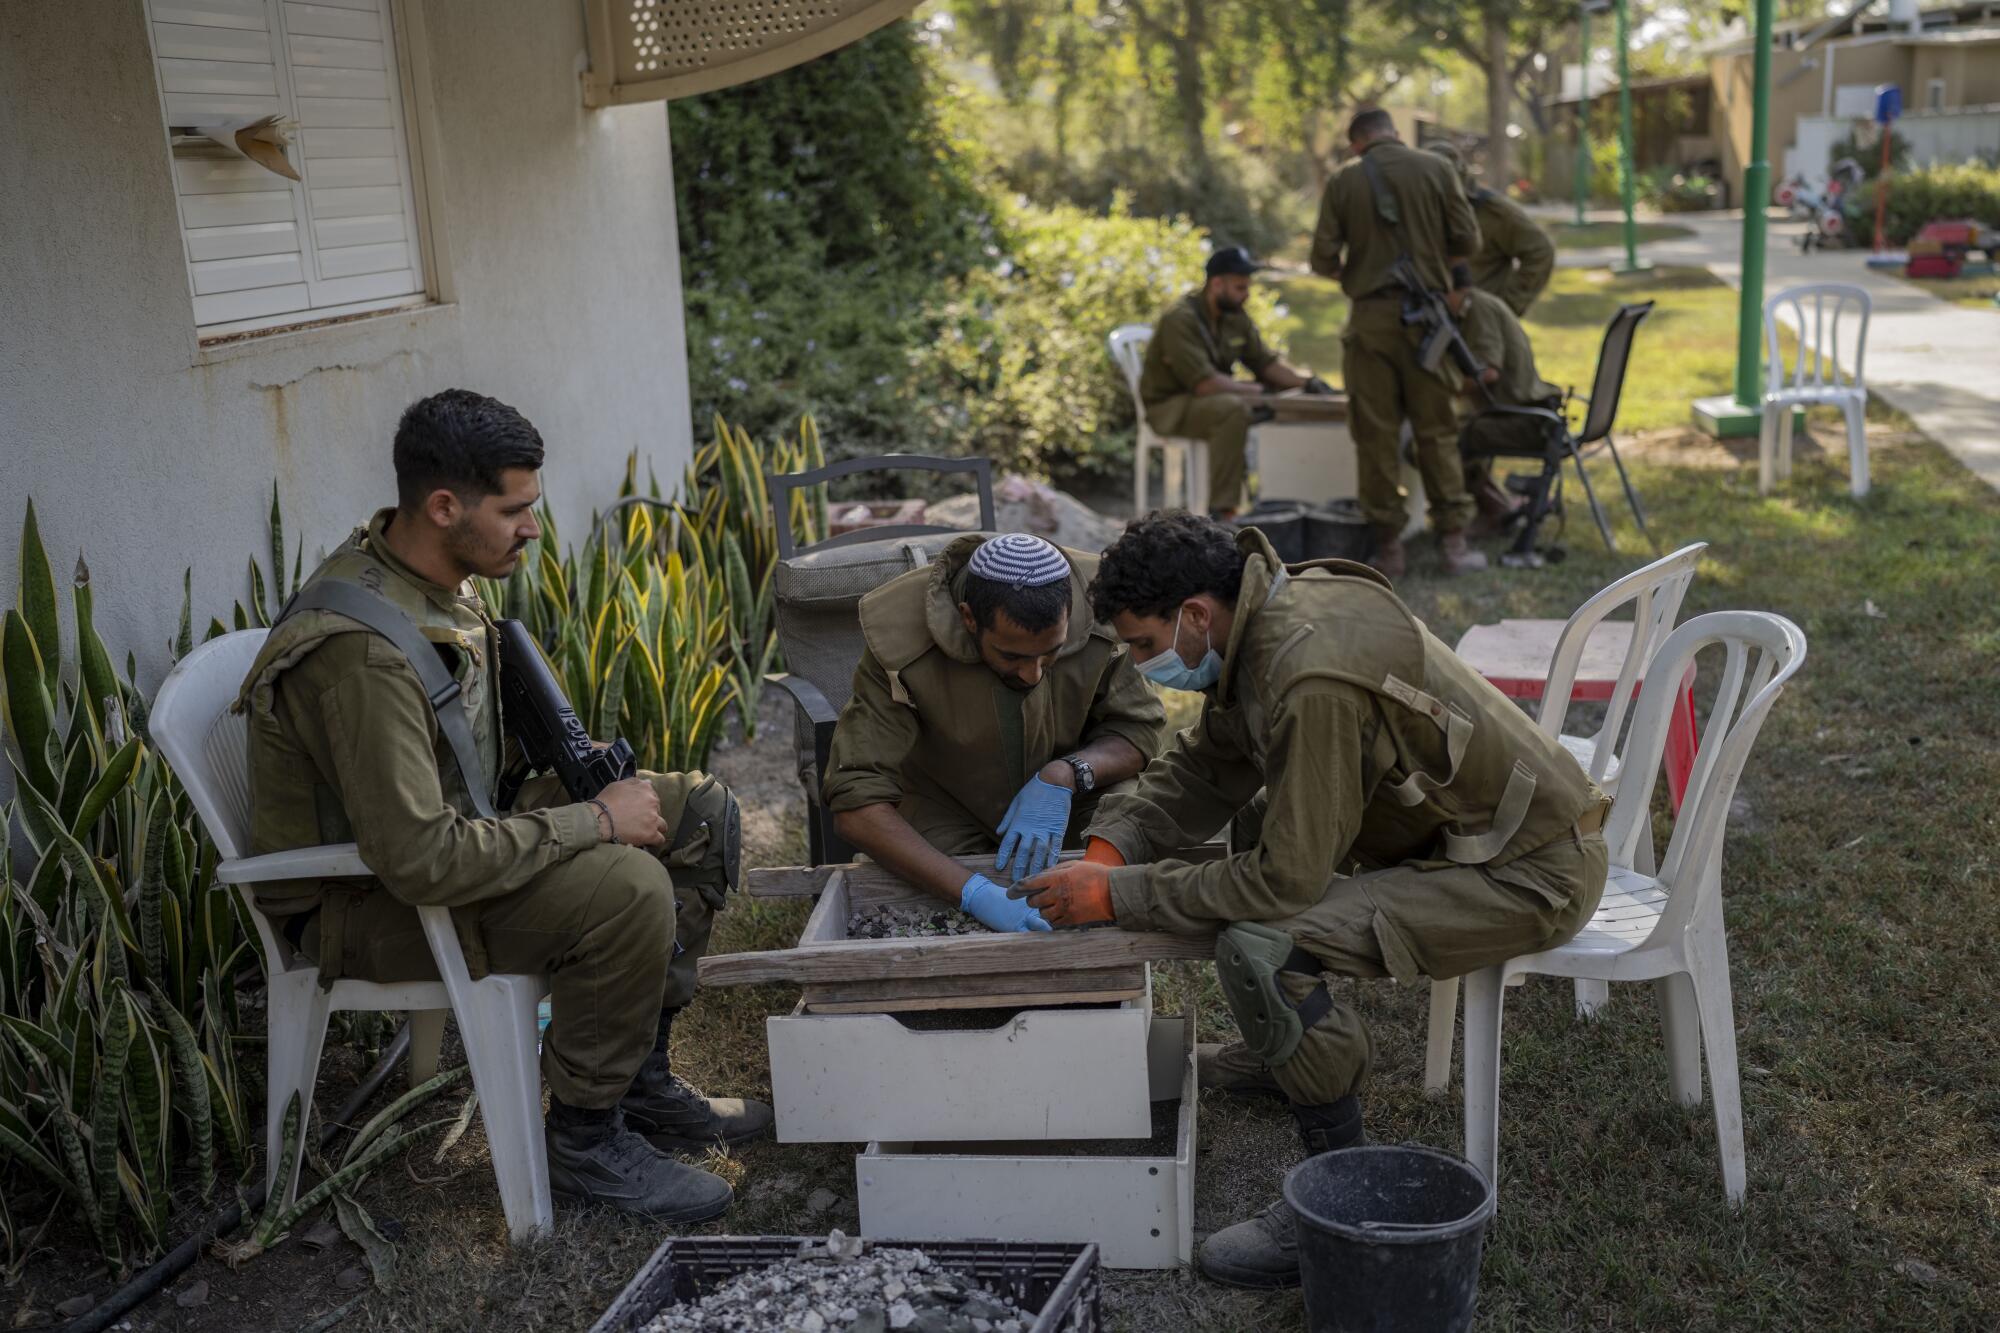 Israeli soldiers examining items in a garden